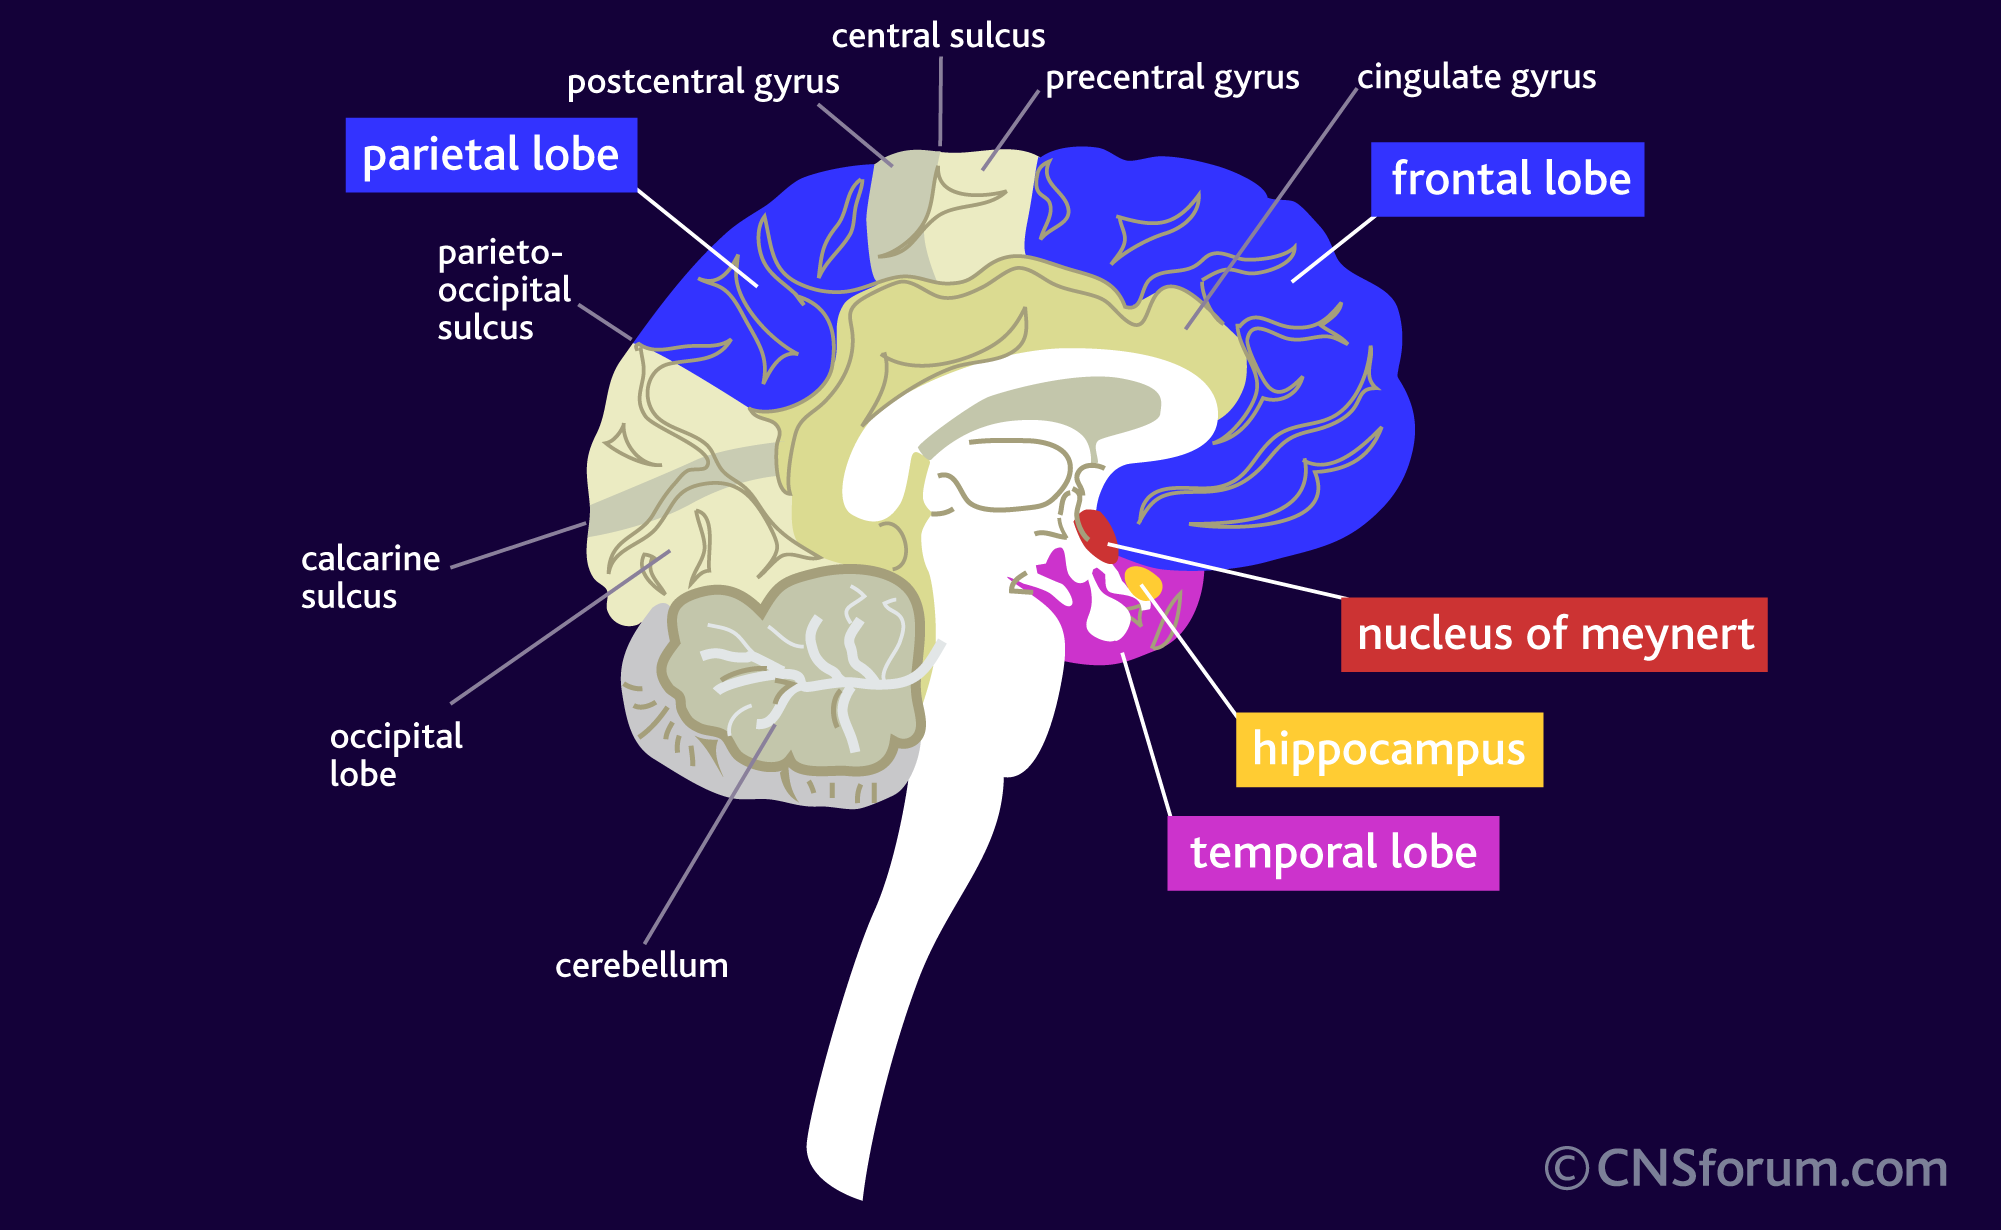 The areas of the brain affected in Alzheimerâs disease ...